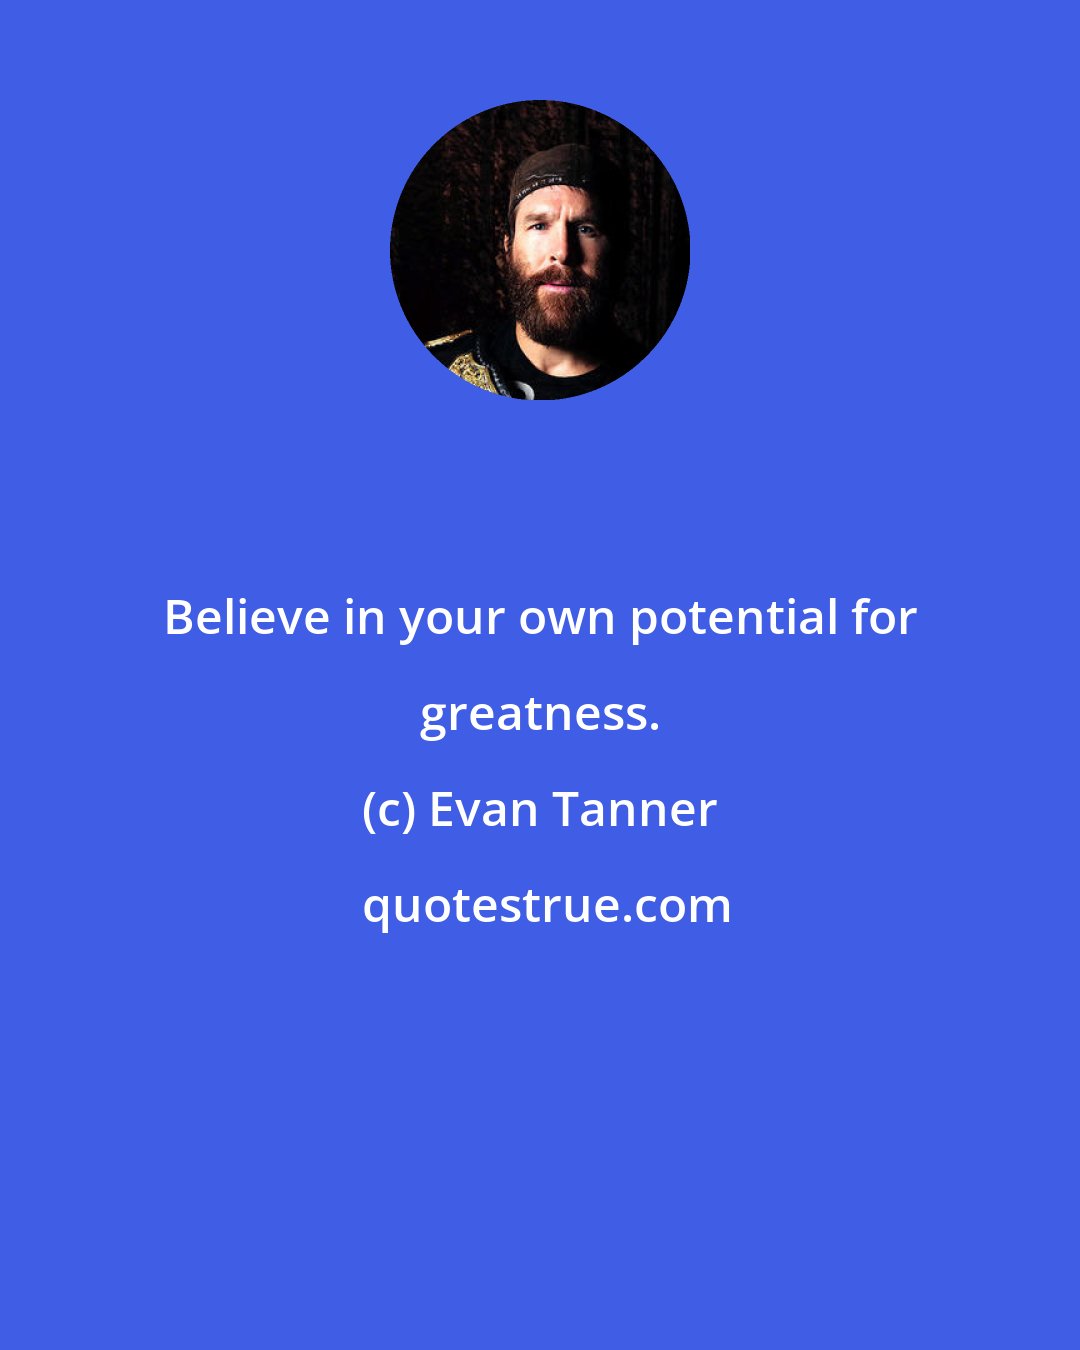 Evan Tanner: Believe in your own potential for greatness.